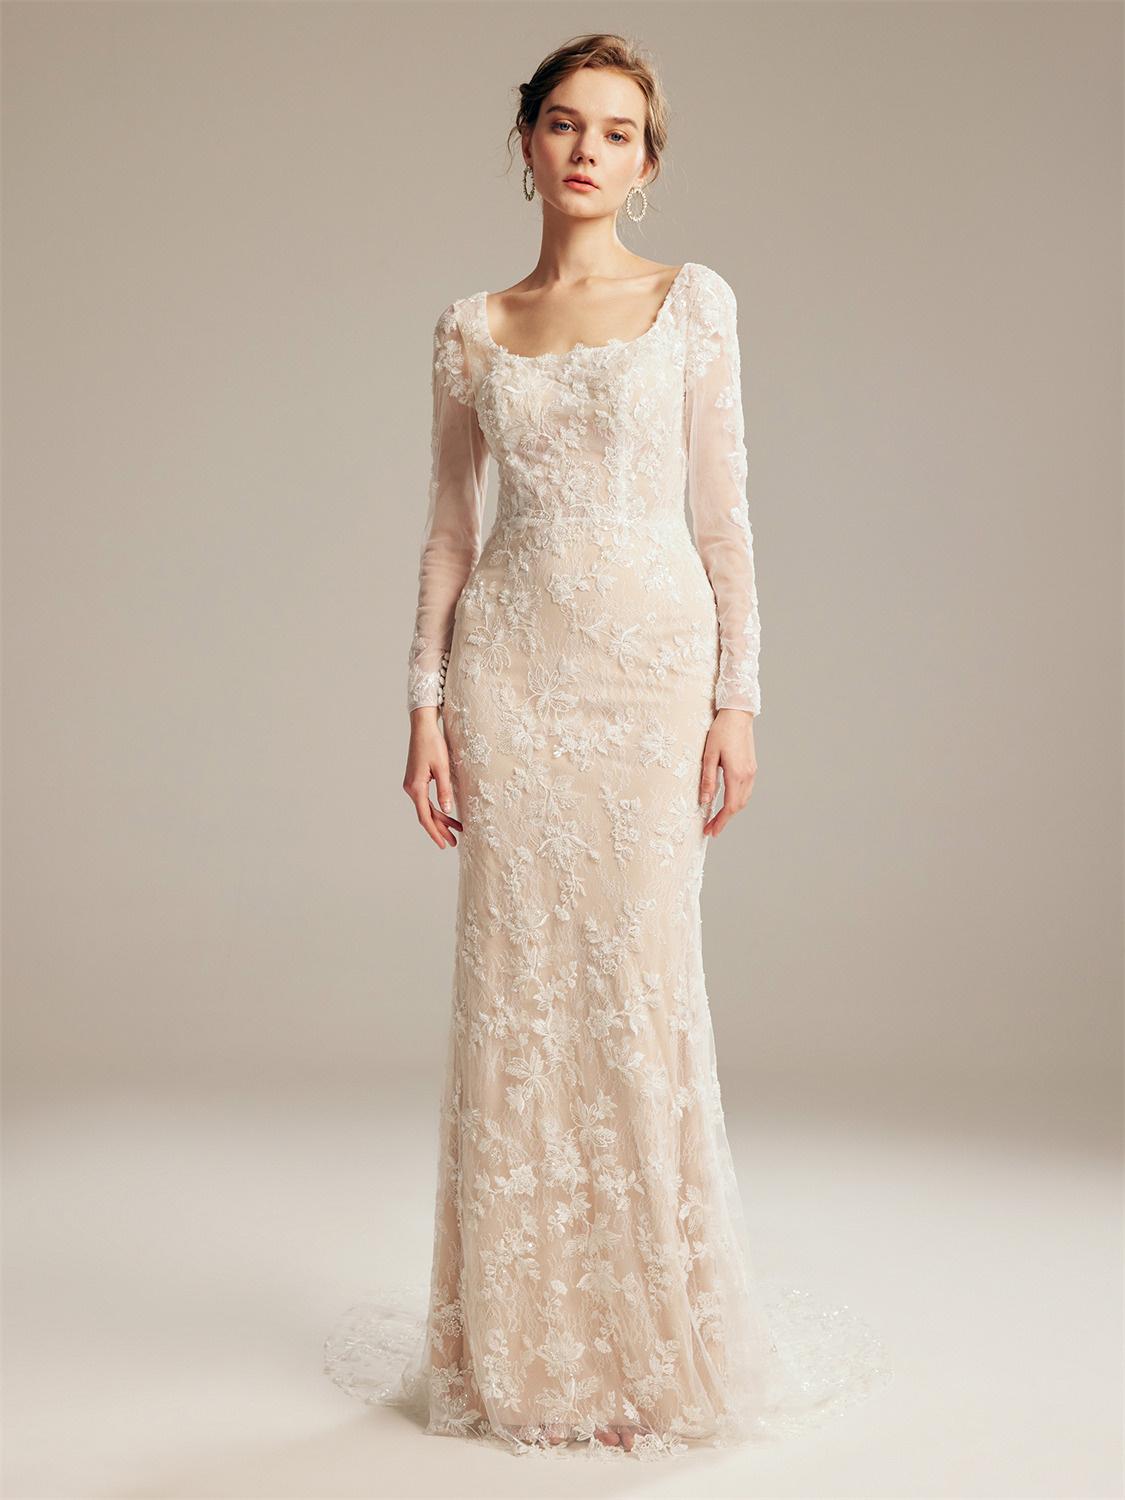 Square Neck Wedding Dresses 28 of the Best Styles hitched.co.uk